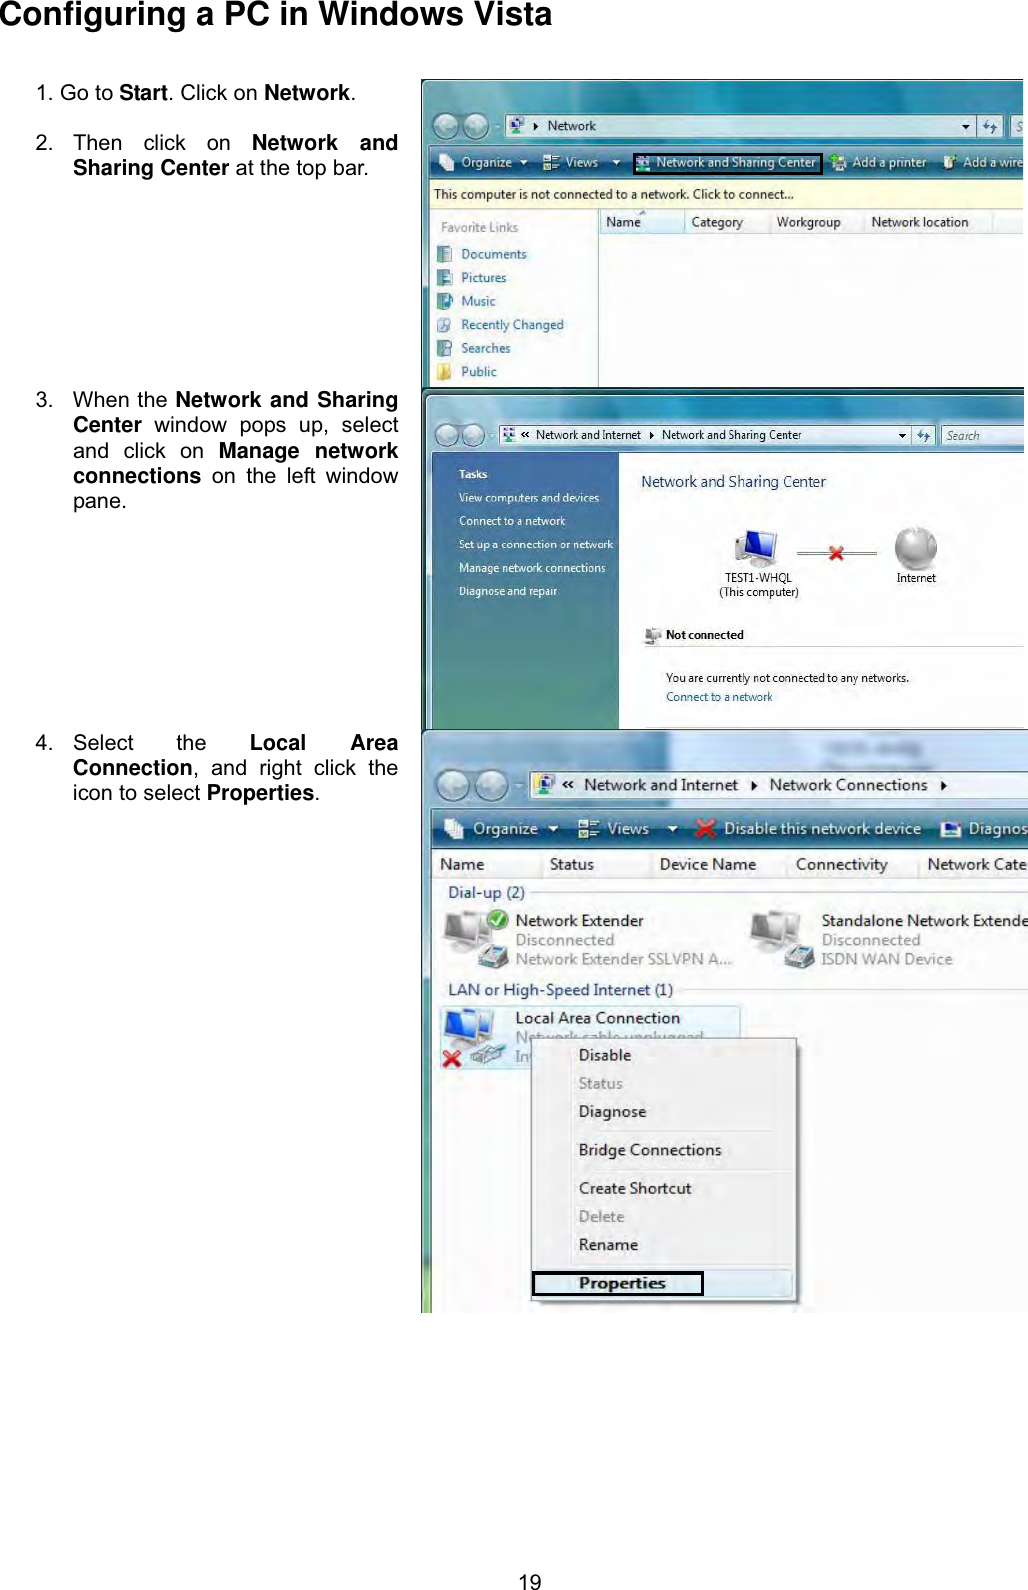 19Configuring a PC in Windows Vista 1. Go to Start. Click on Network.2. Then click on Network and Sharing Center at the top bar. 3. When the Network and Sharing Center window pops up, select and click on Manage network connections on the left window pane. 4. Select  the  Local Area Connection, and right click the icon to select Properties.